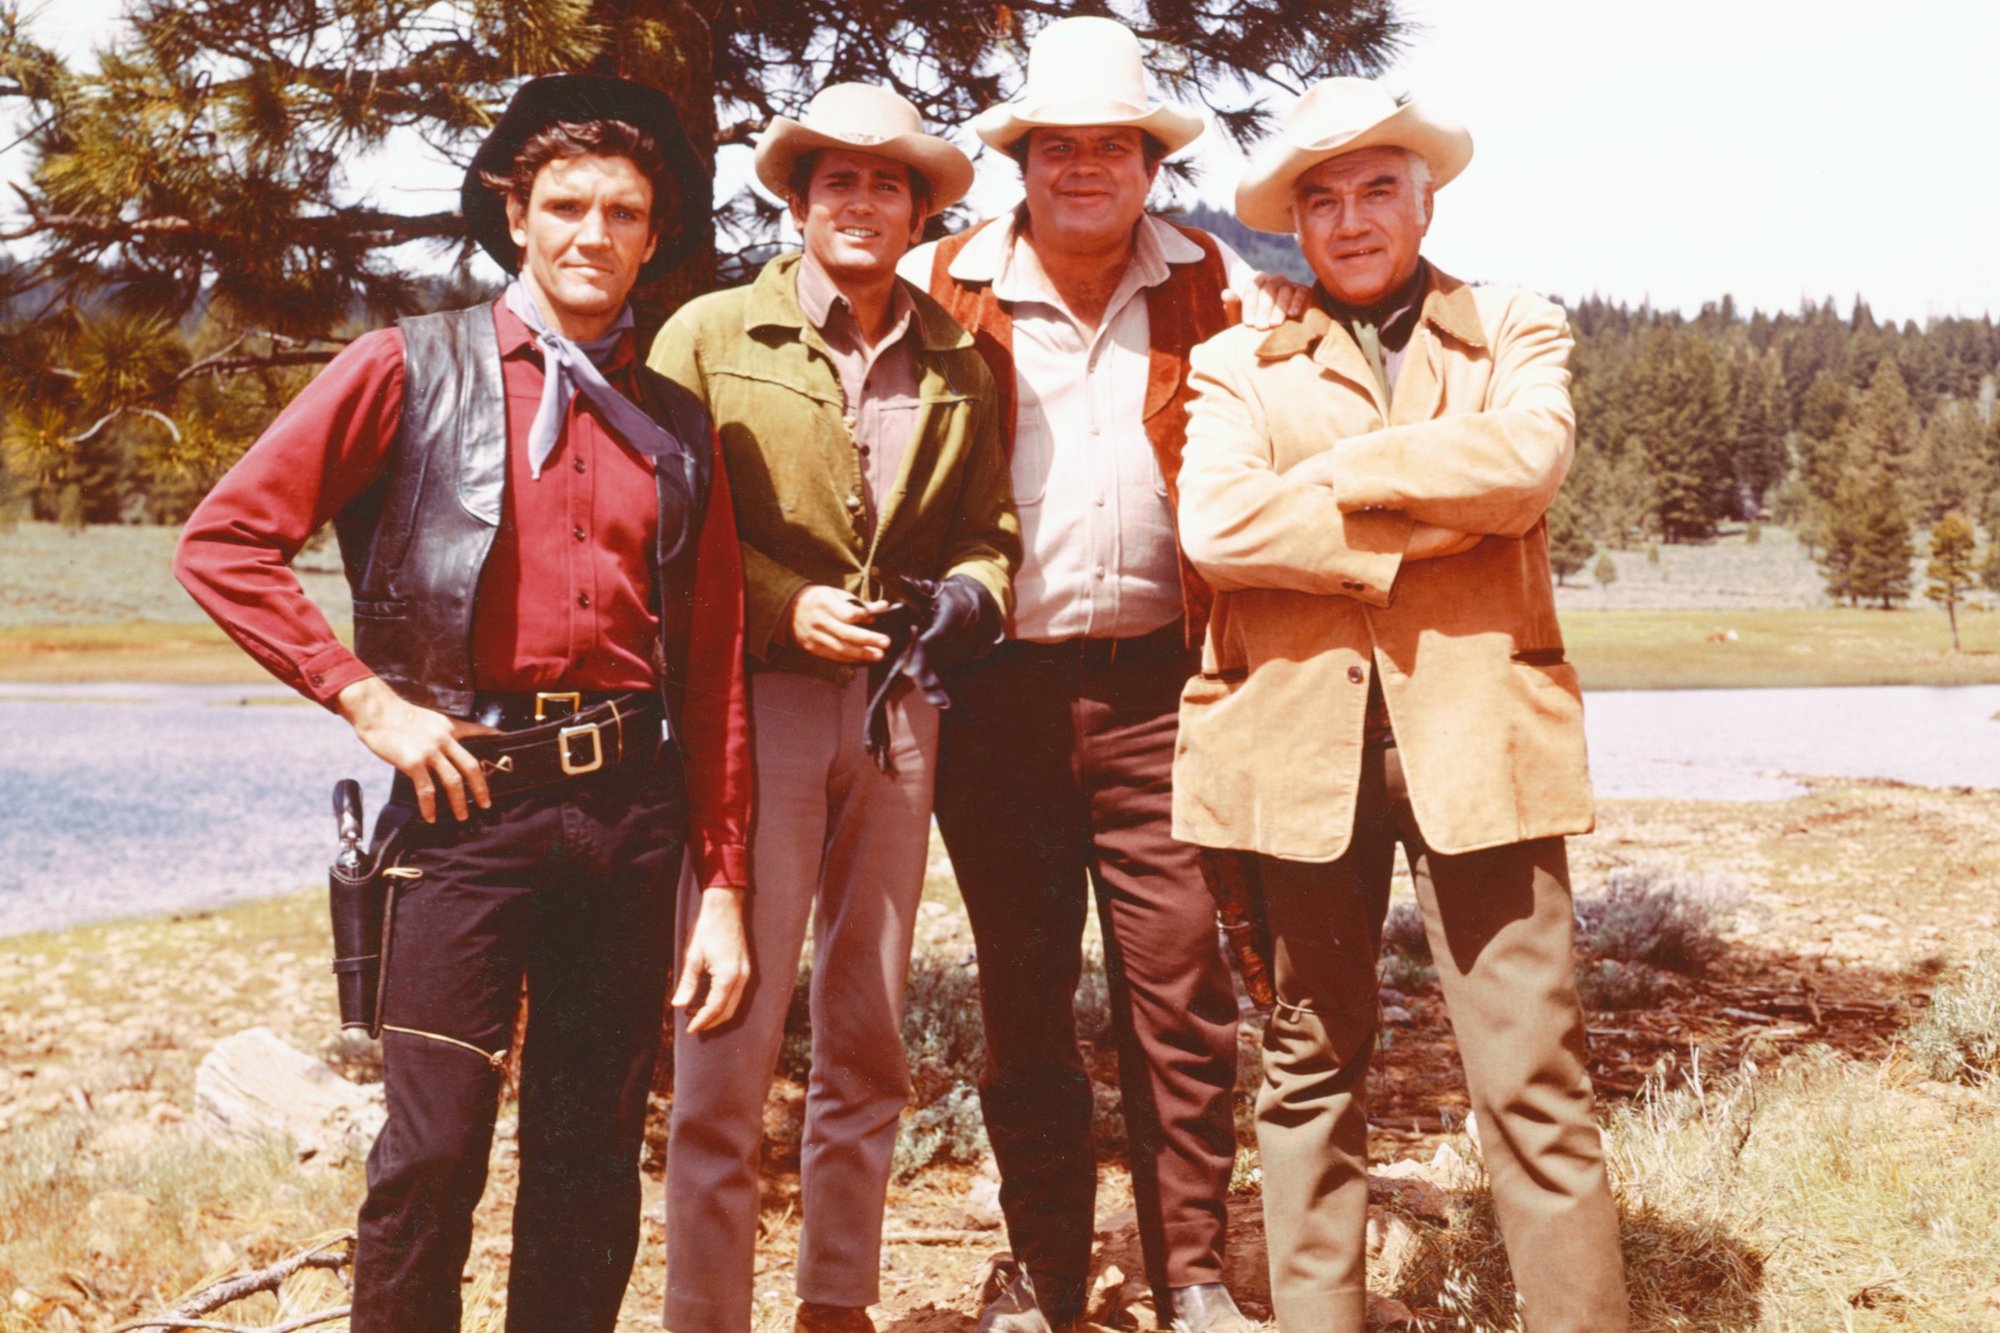 'Bonanza' cast Pernell Roberts, Michael Landon, Dan Blocker, and Lorne Greene wearing Western clothes, standing in the grass in front of a tree